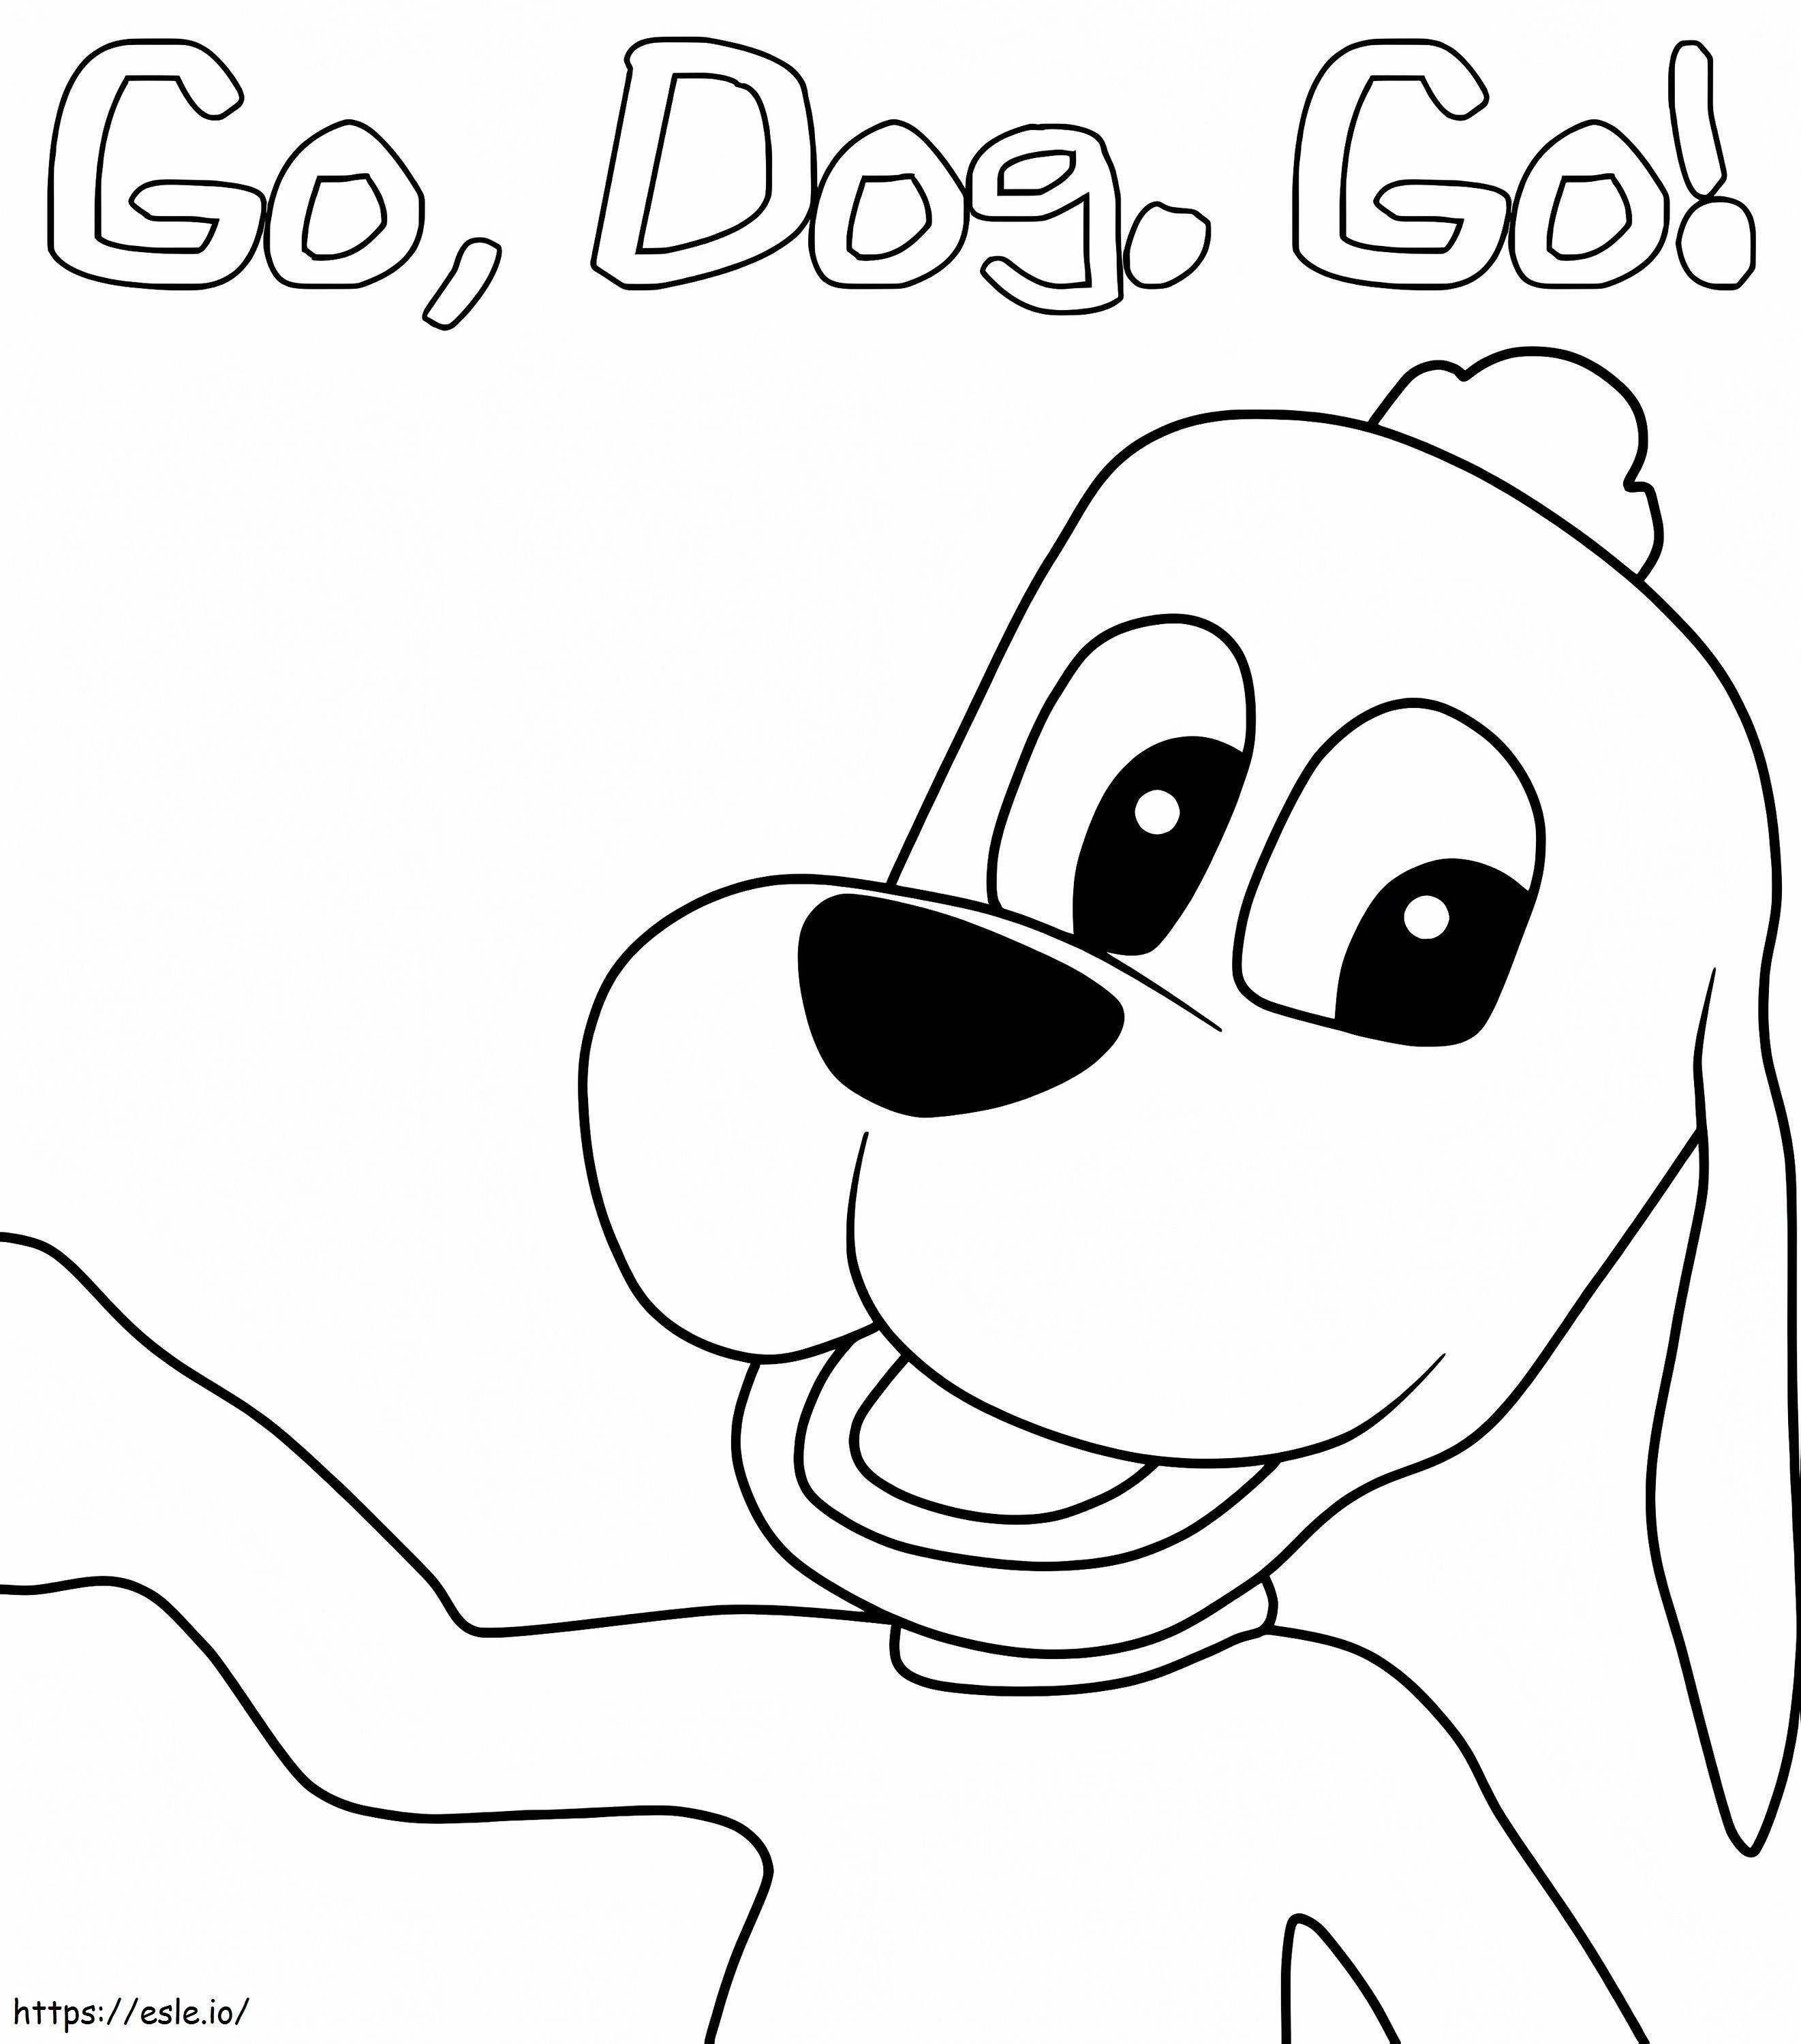 Tag Barker From Go Dog Go coloring page